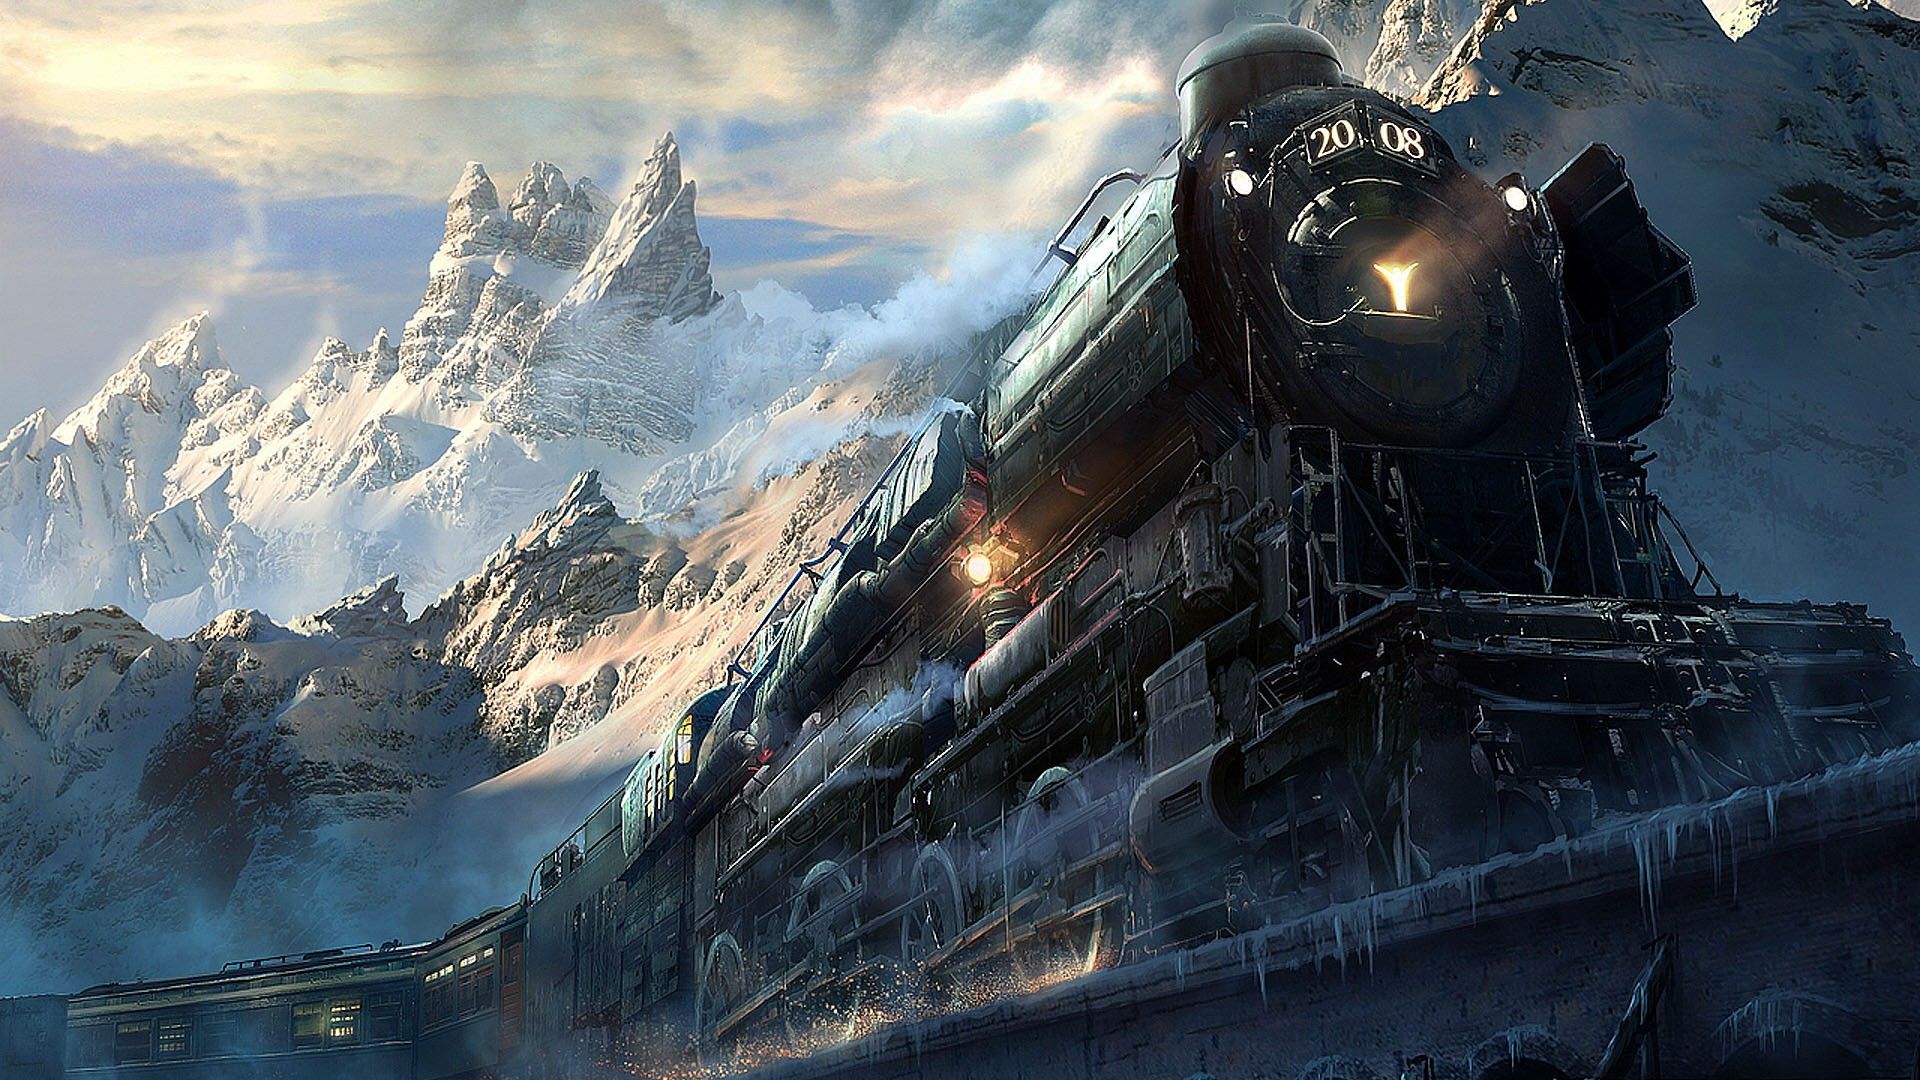 25+ Collection Of Beautiful Train Wallpapers | DesignTrends